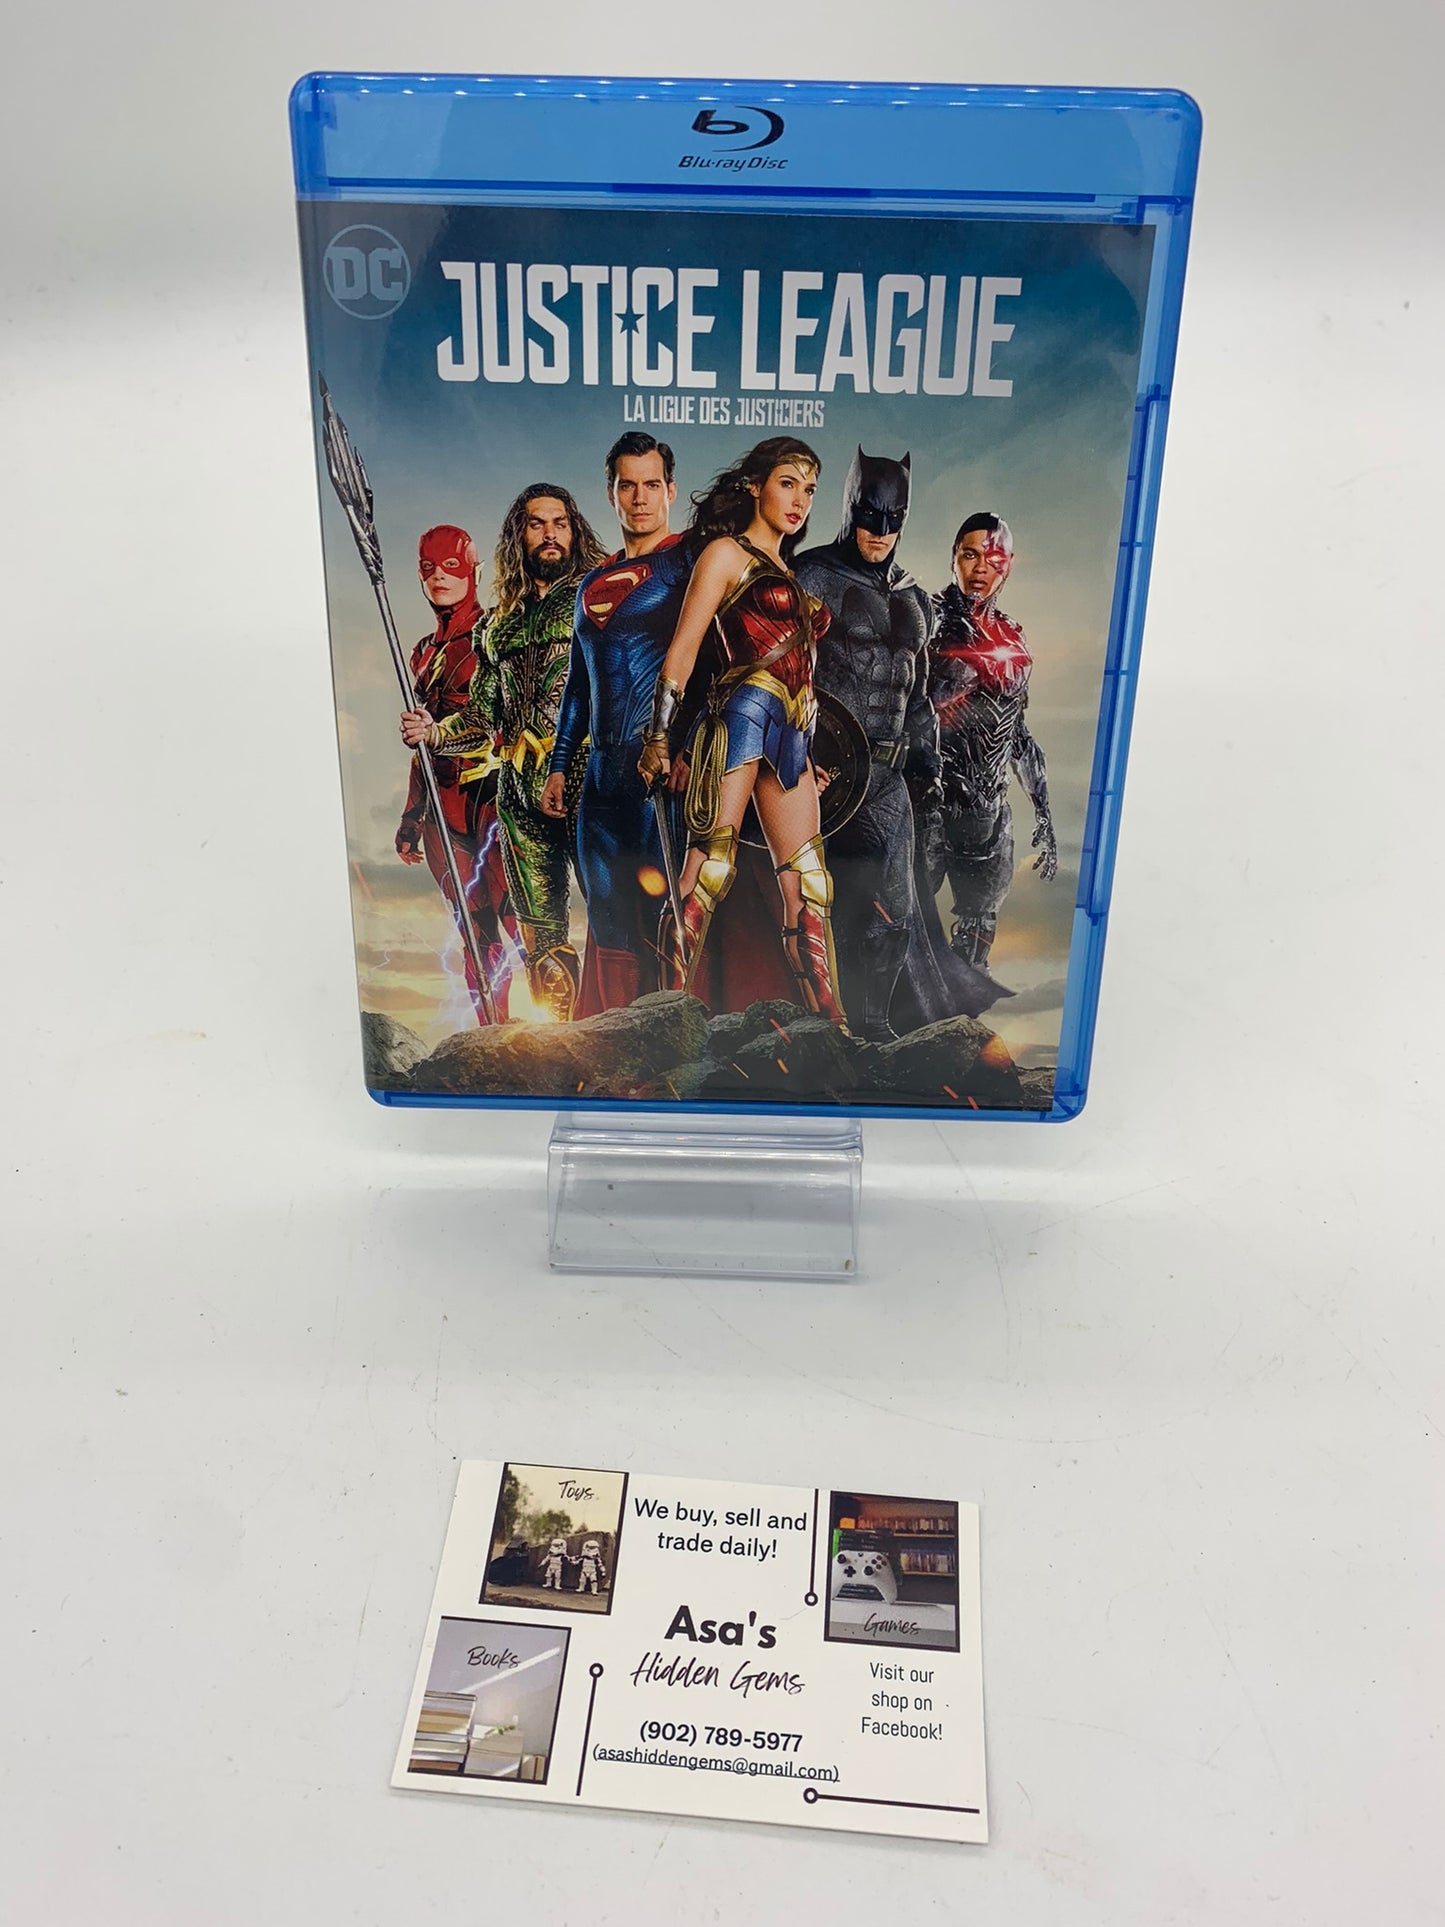 Justice League [Blu-ray] [BD]